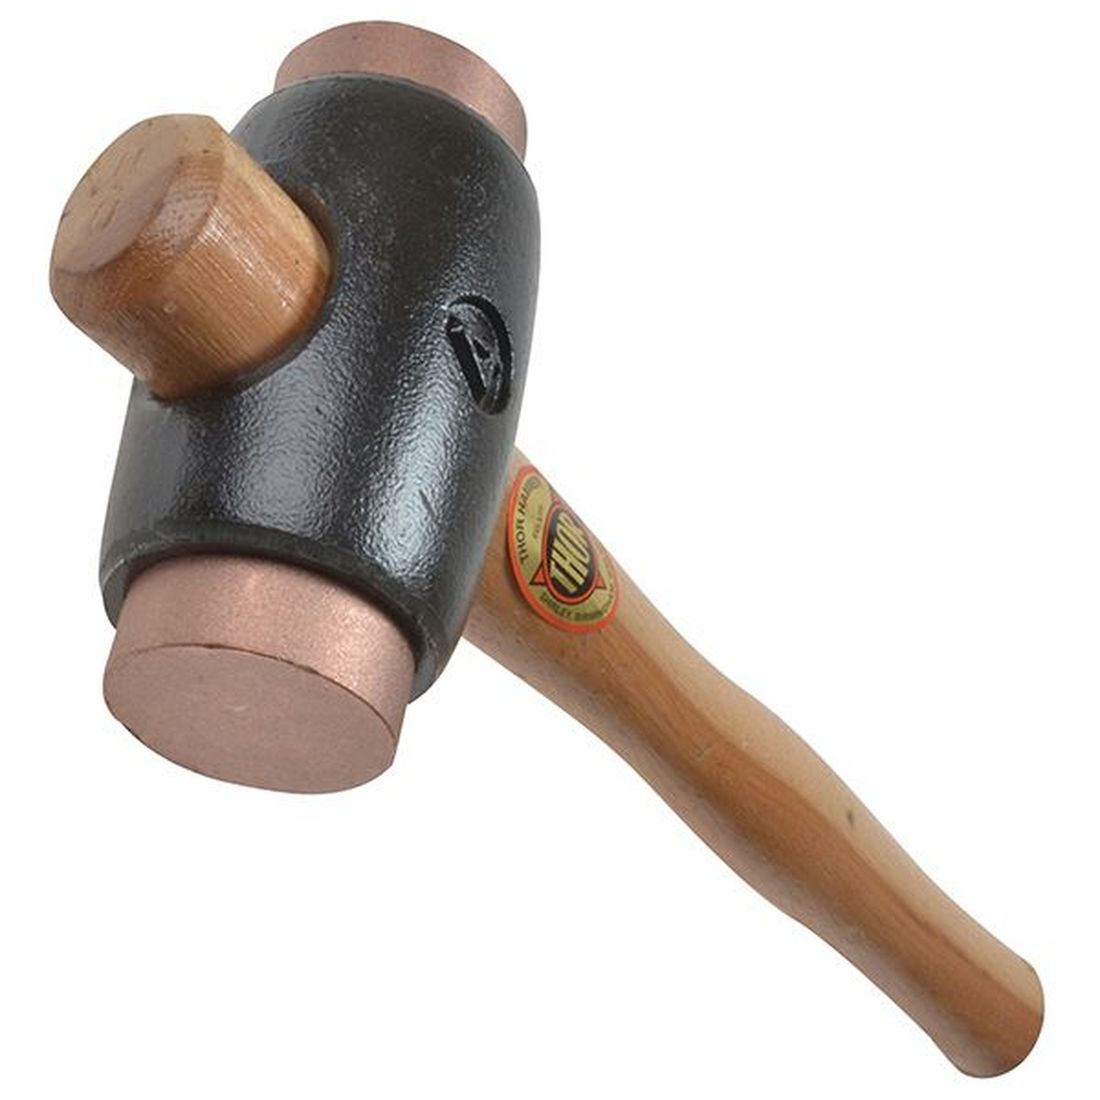 Thor 316 Copper Hammer Size 4 (50mm) 2830g                                           